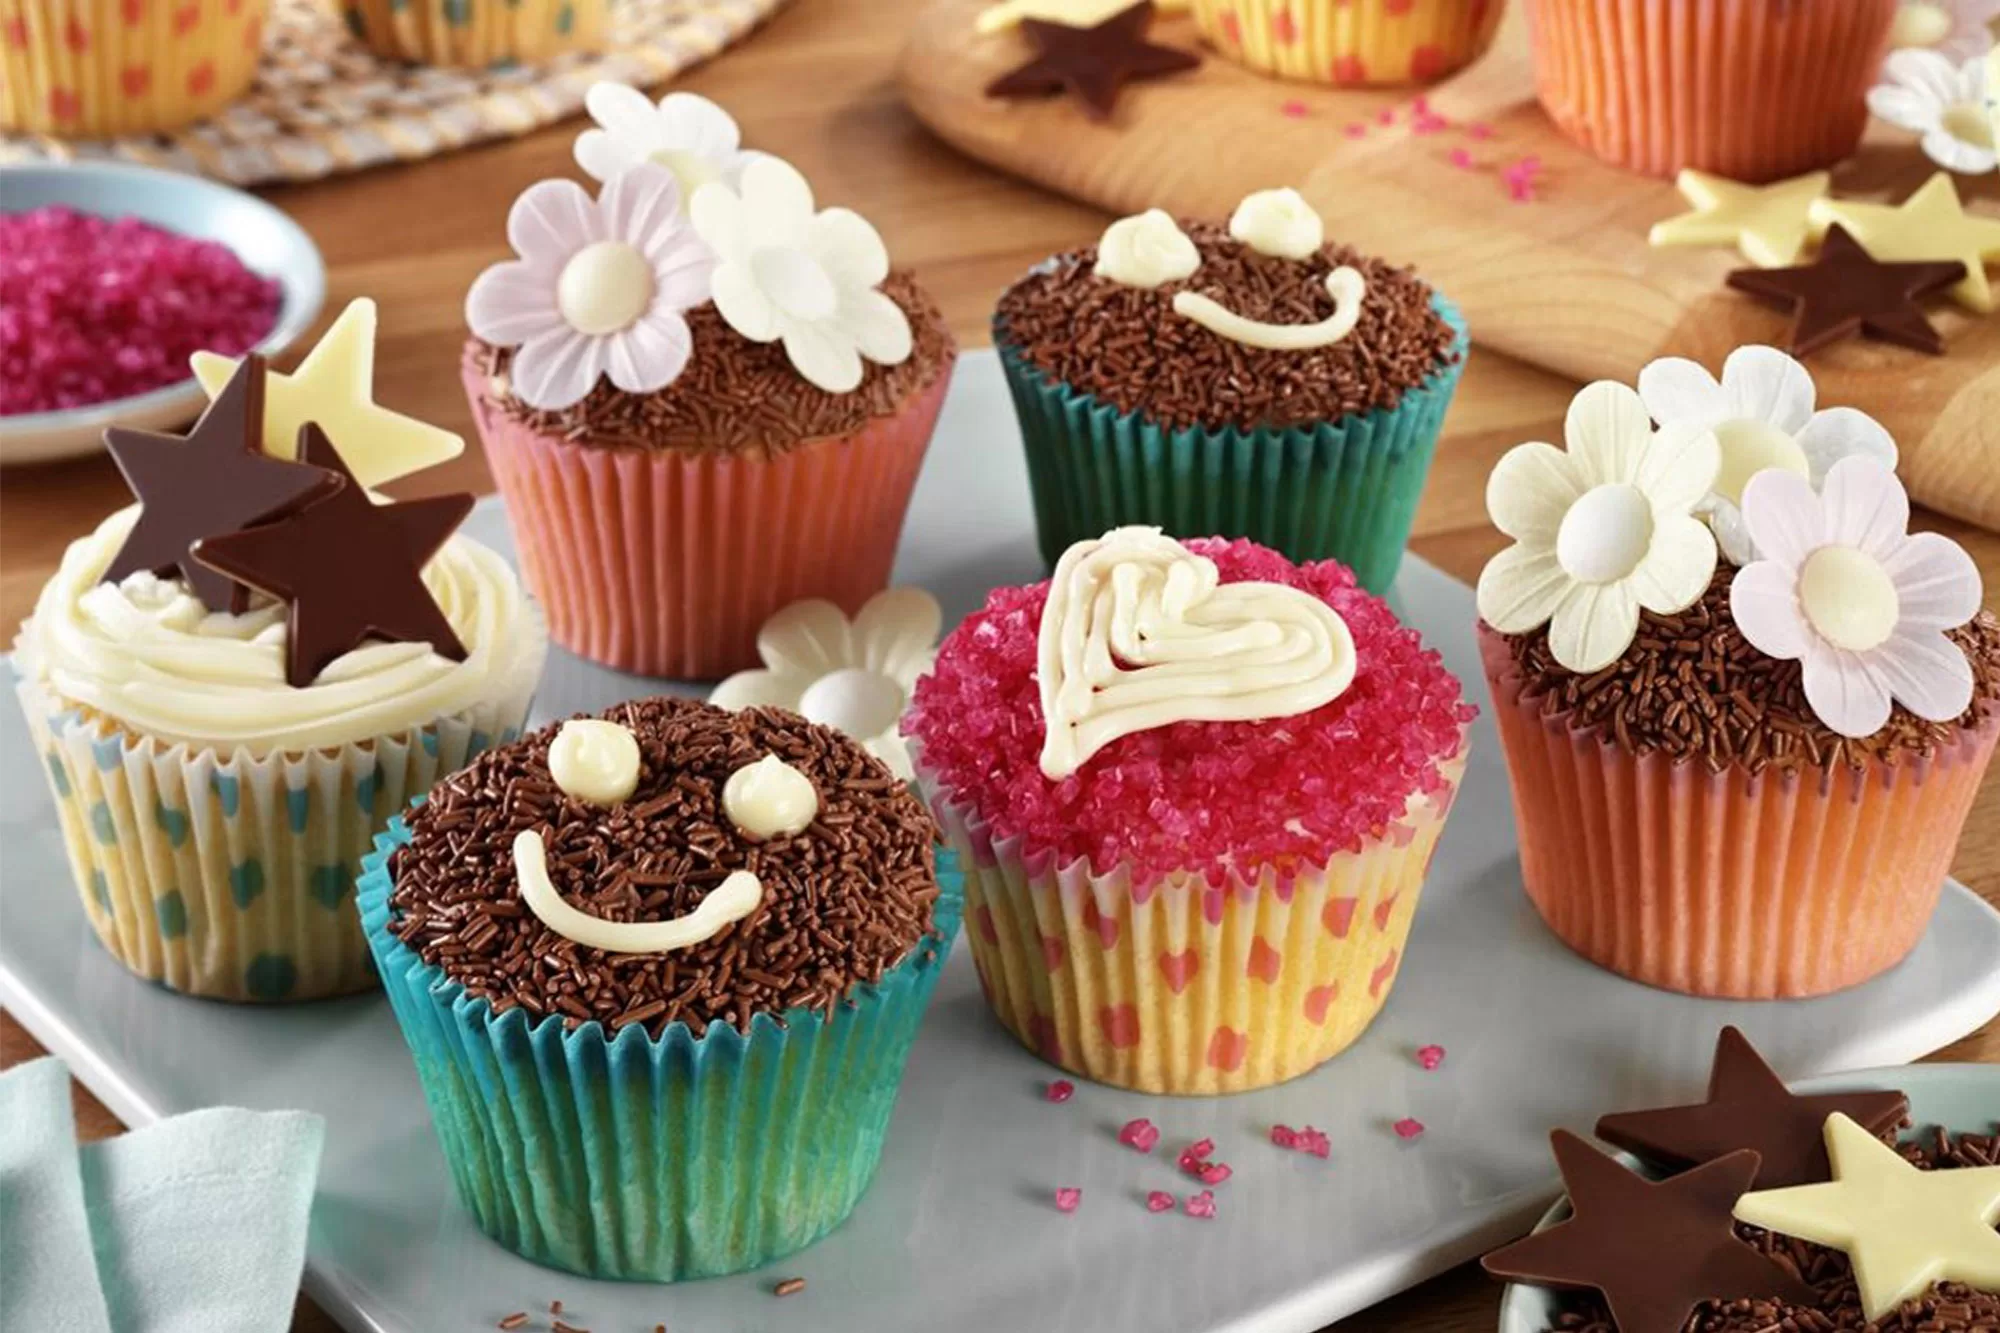 Make Your Cupcakes More Attractive With These Creative Tips